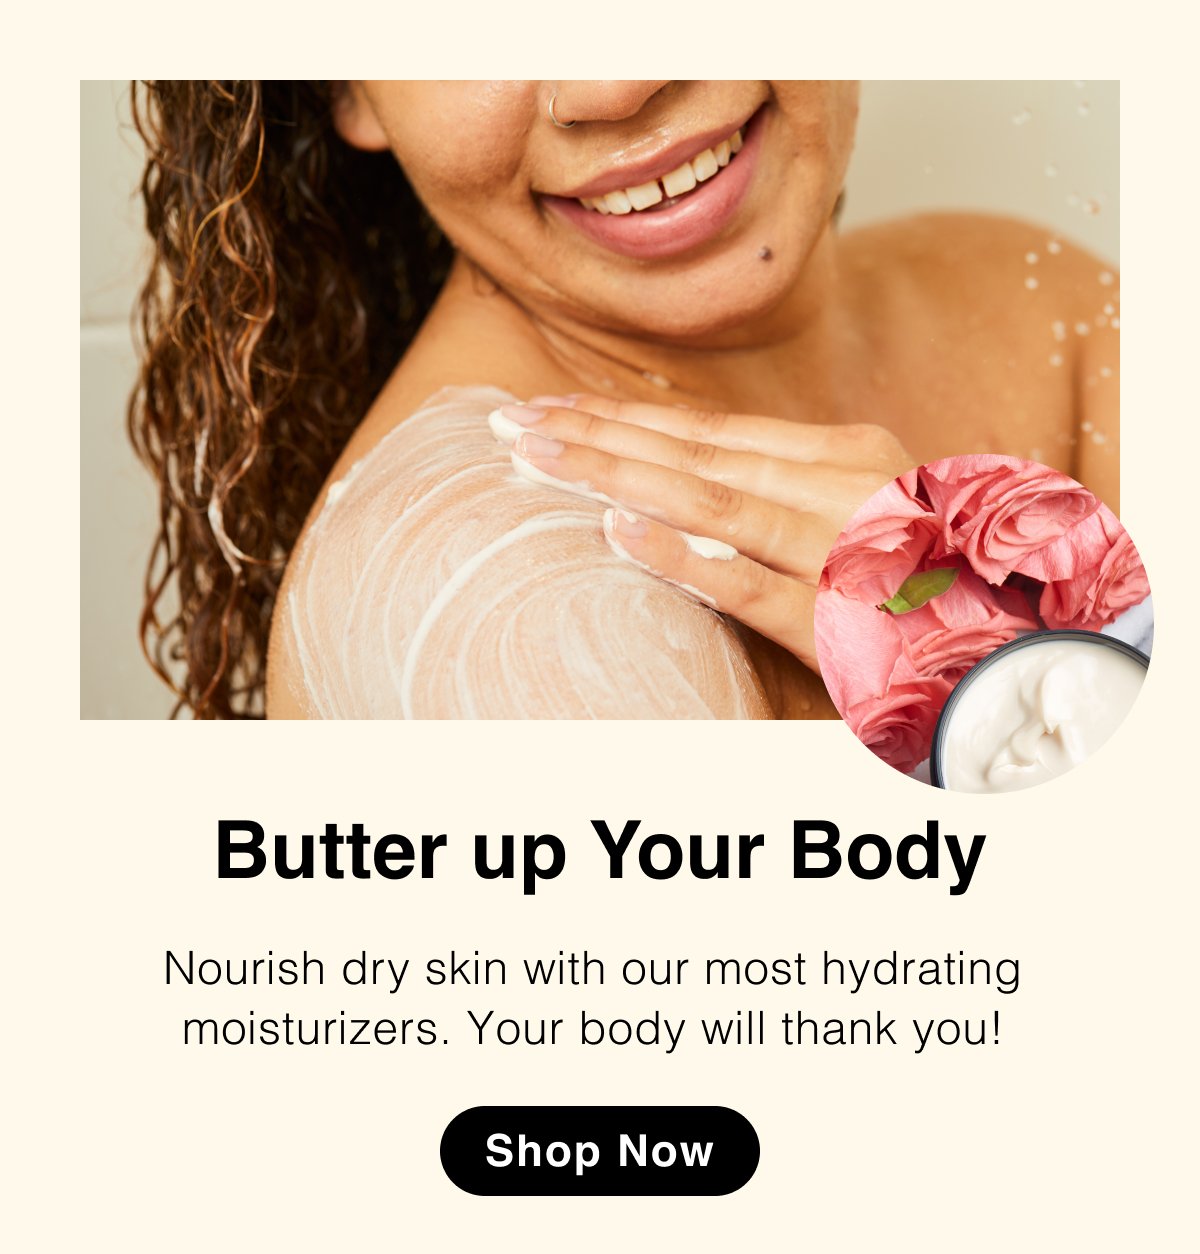 Butter up Your Body: Nourish dry skin with our most hydrating moisturizers. Your body will thank you! Shop Now.